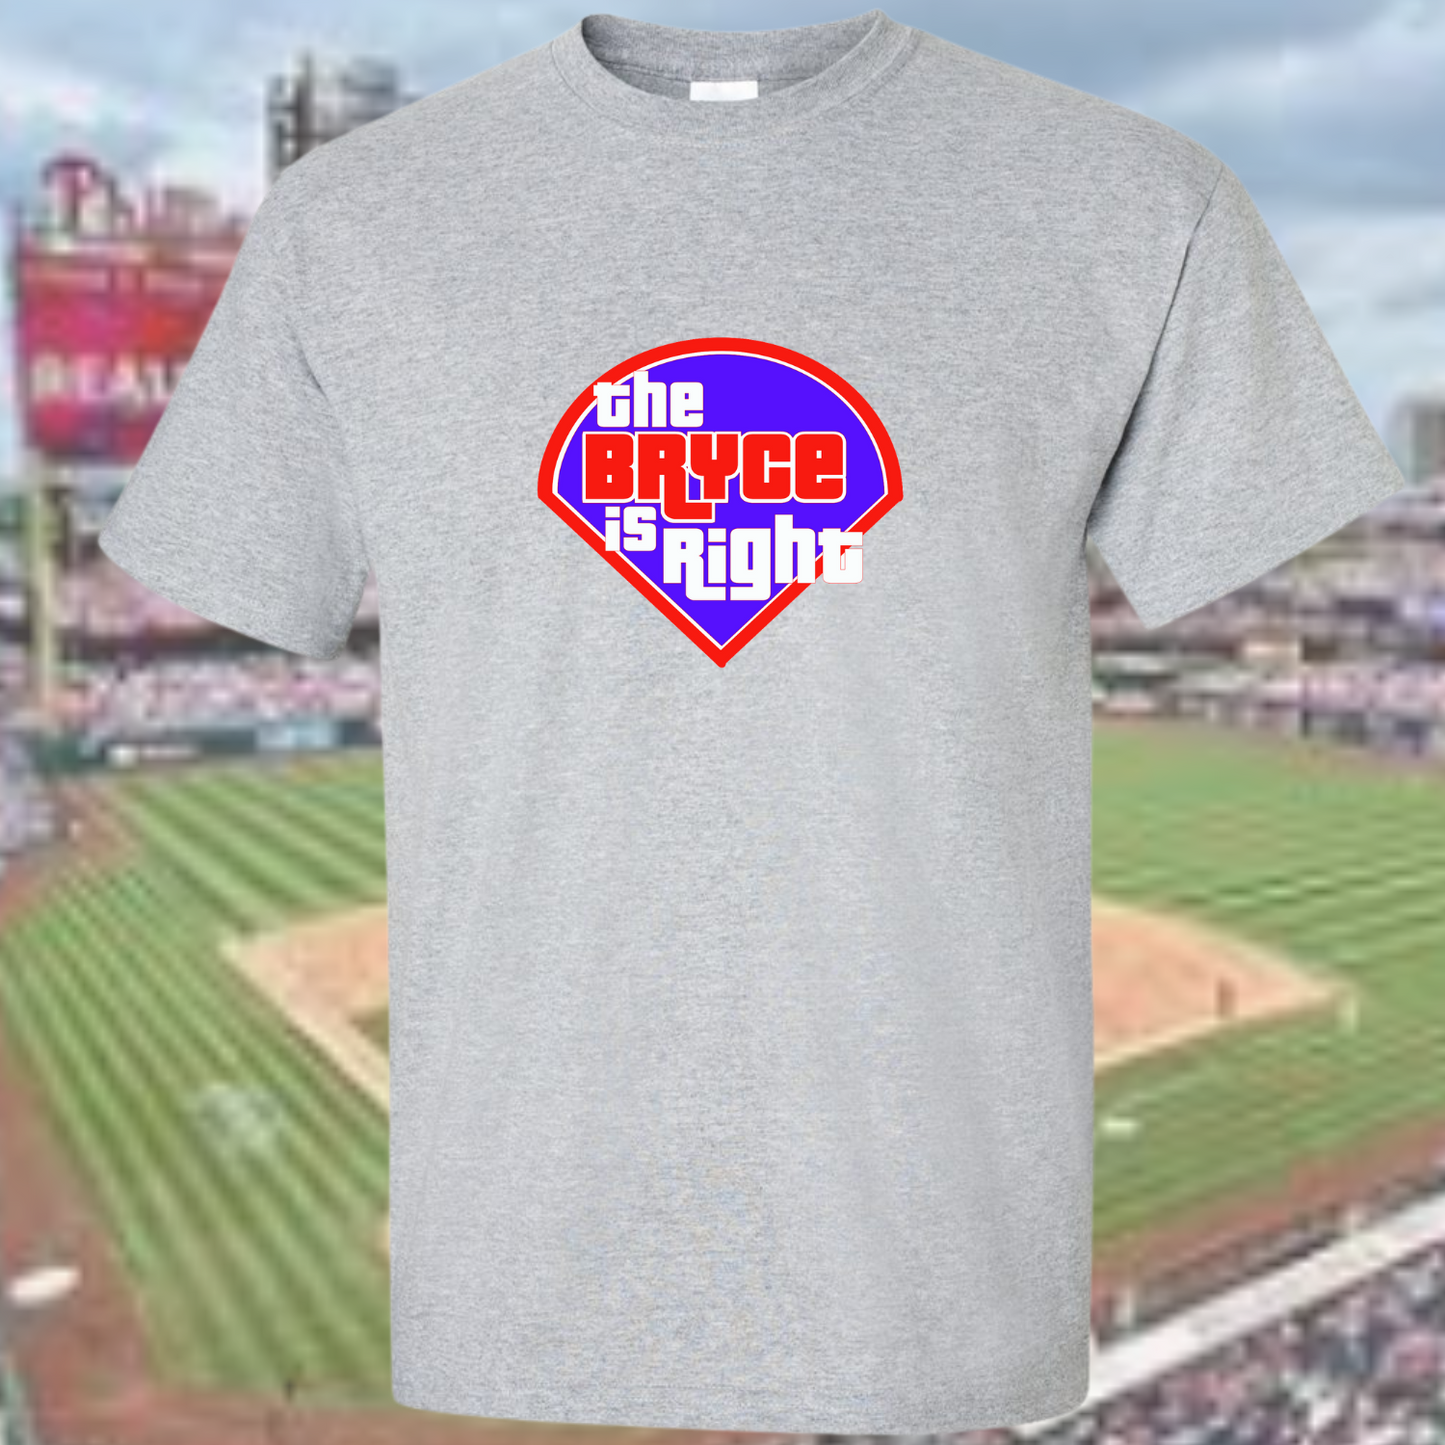 The Bryce is Right! Short Sleeve T-Shirt